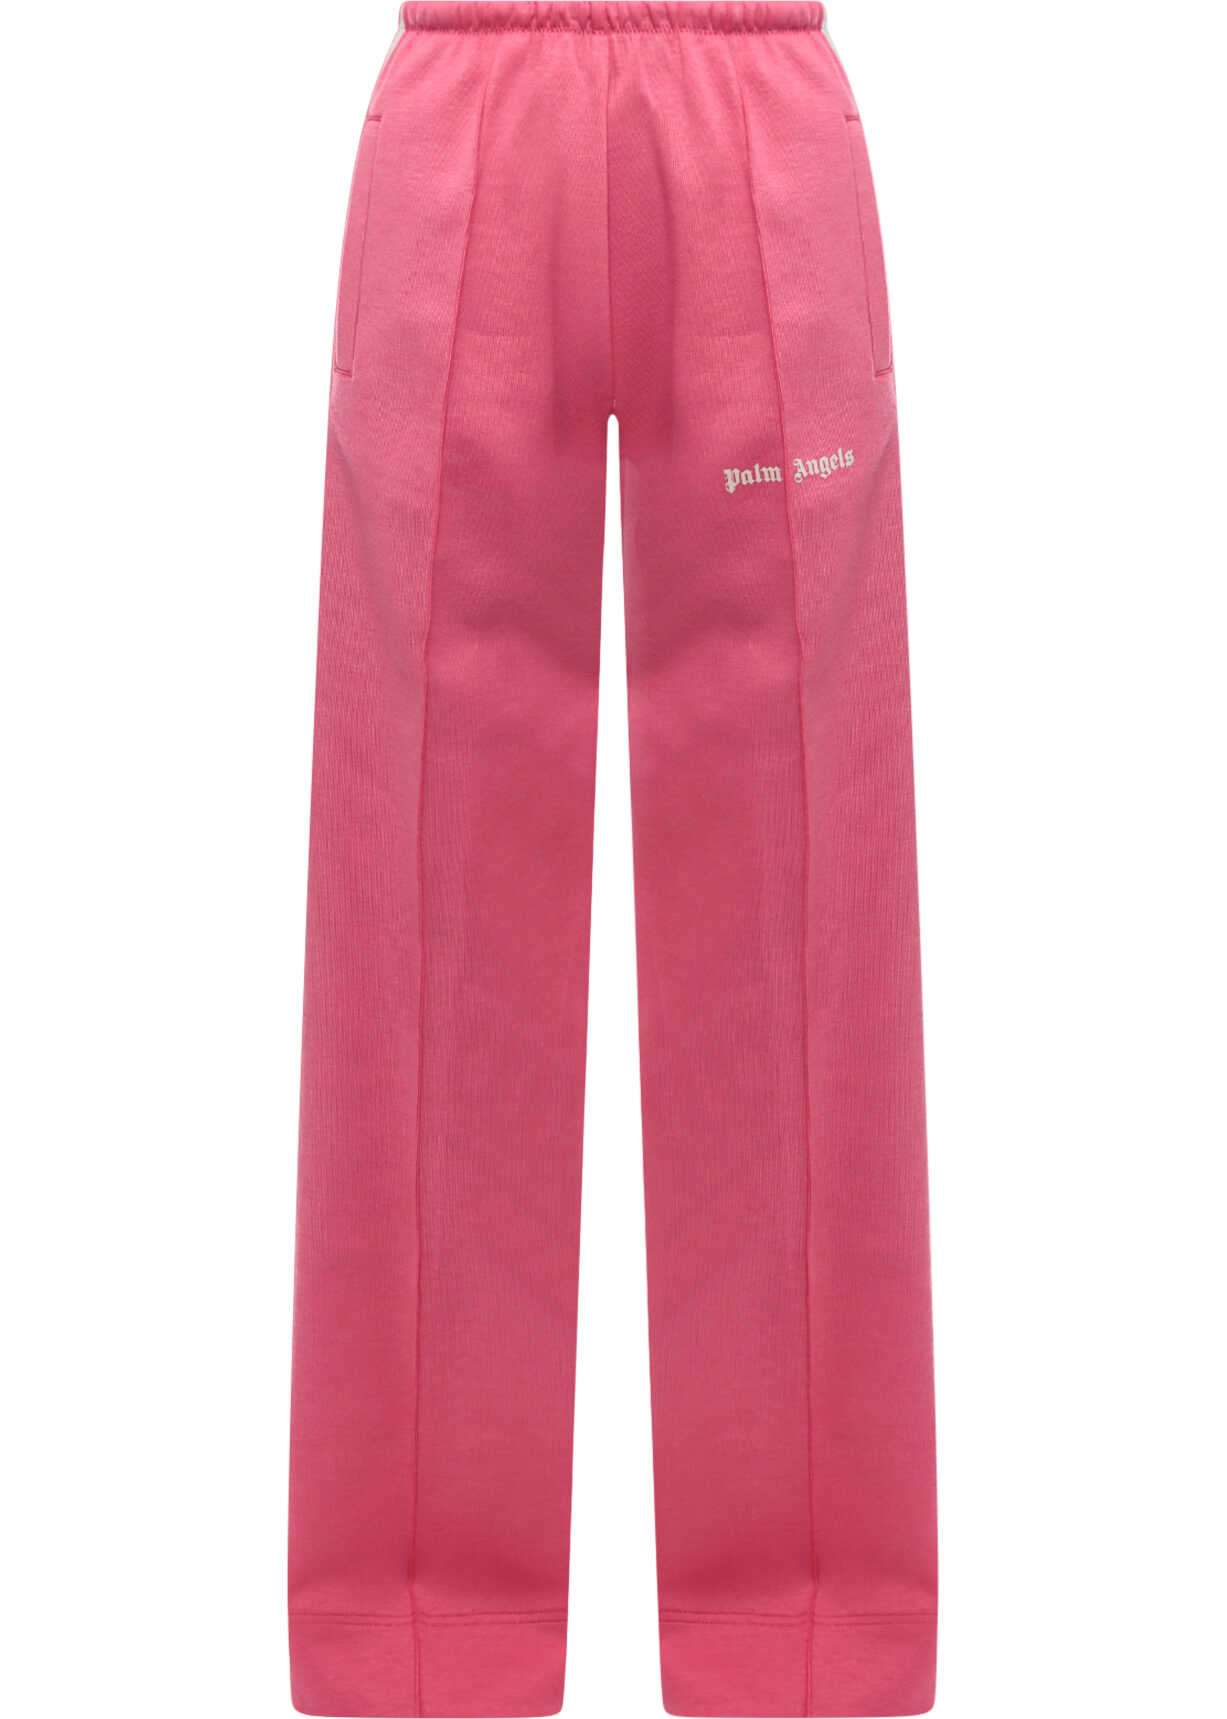 Palm Angels Trouser Pink image0